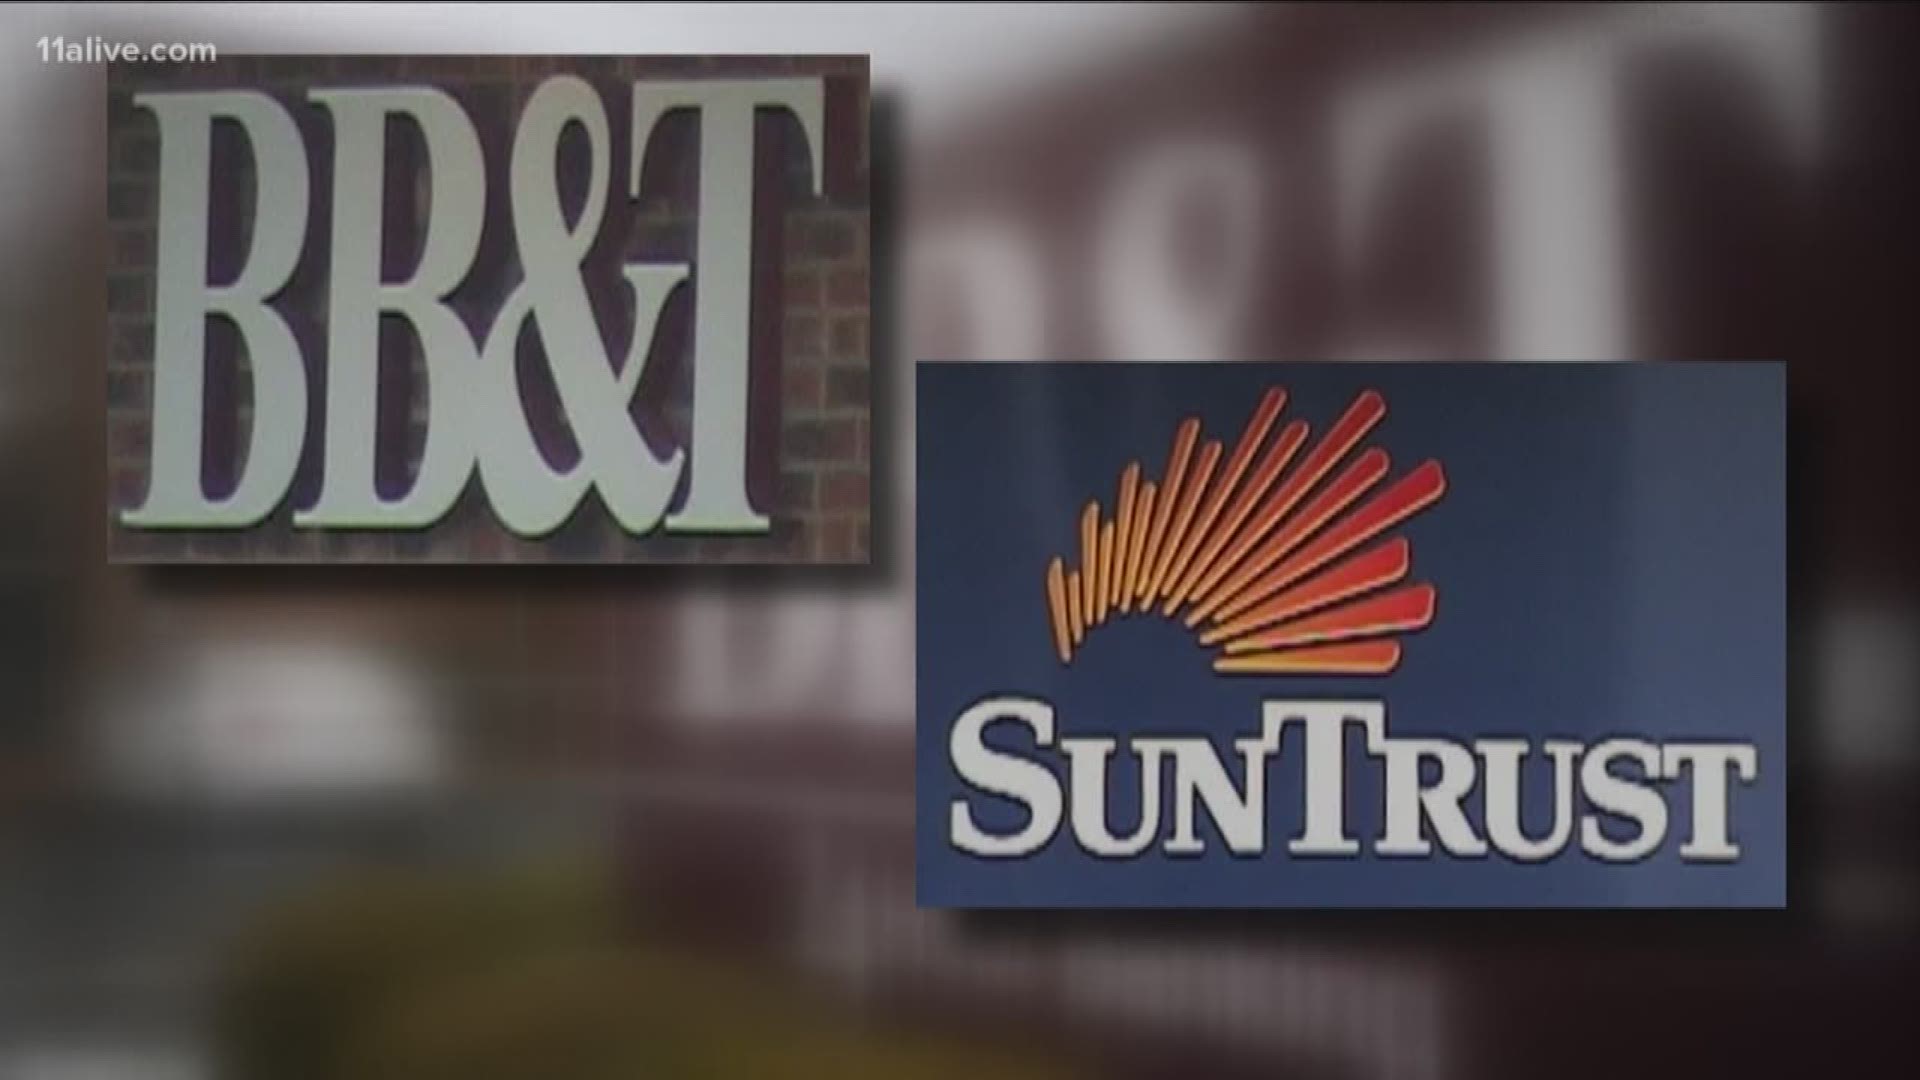 Southern regional banks BB&T and SunTrust are combining in an all-stock deal to create a new bank valued at about $66 billion -- leaving many wondering what's next for SunTrust Park, home of the Atlanta Braves.